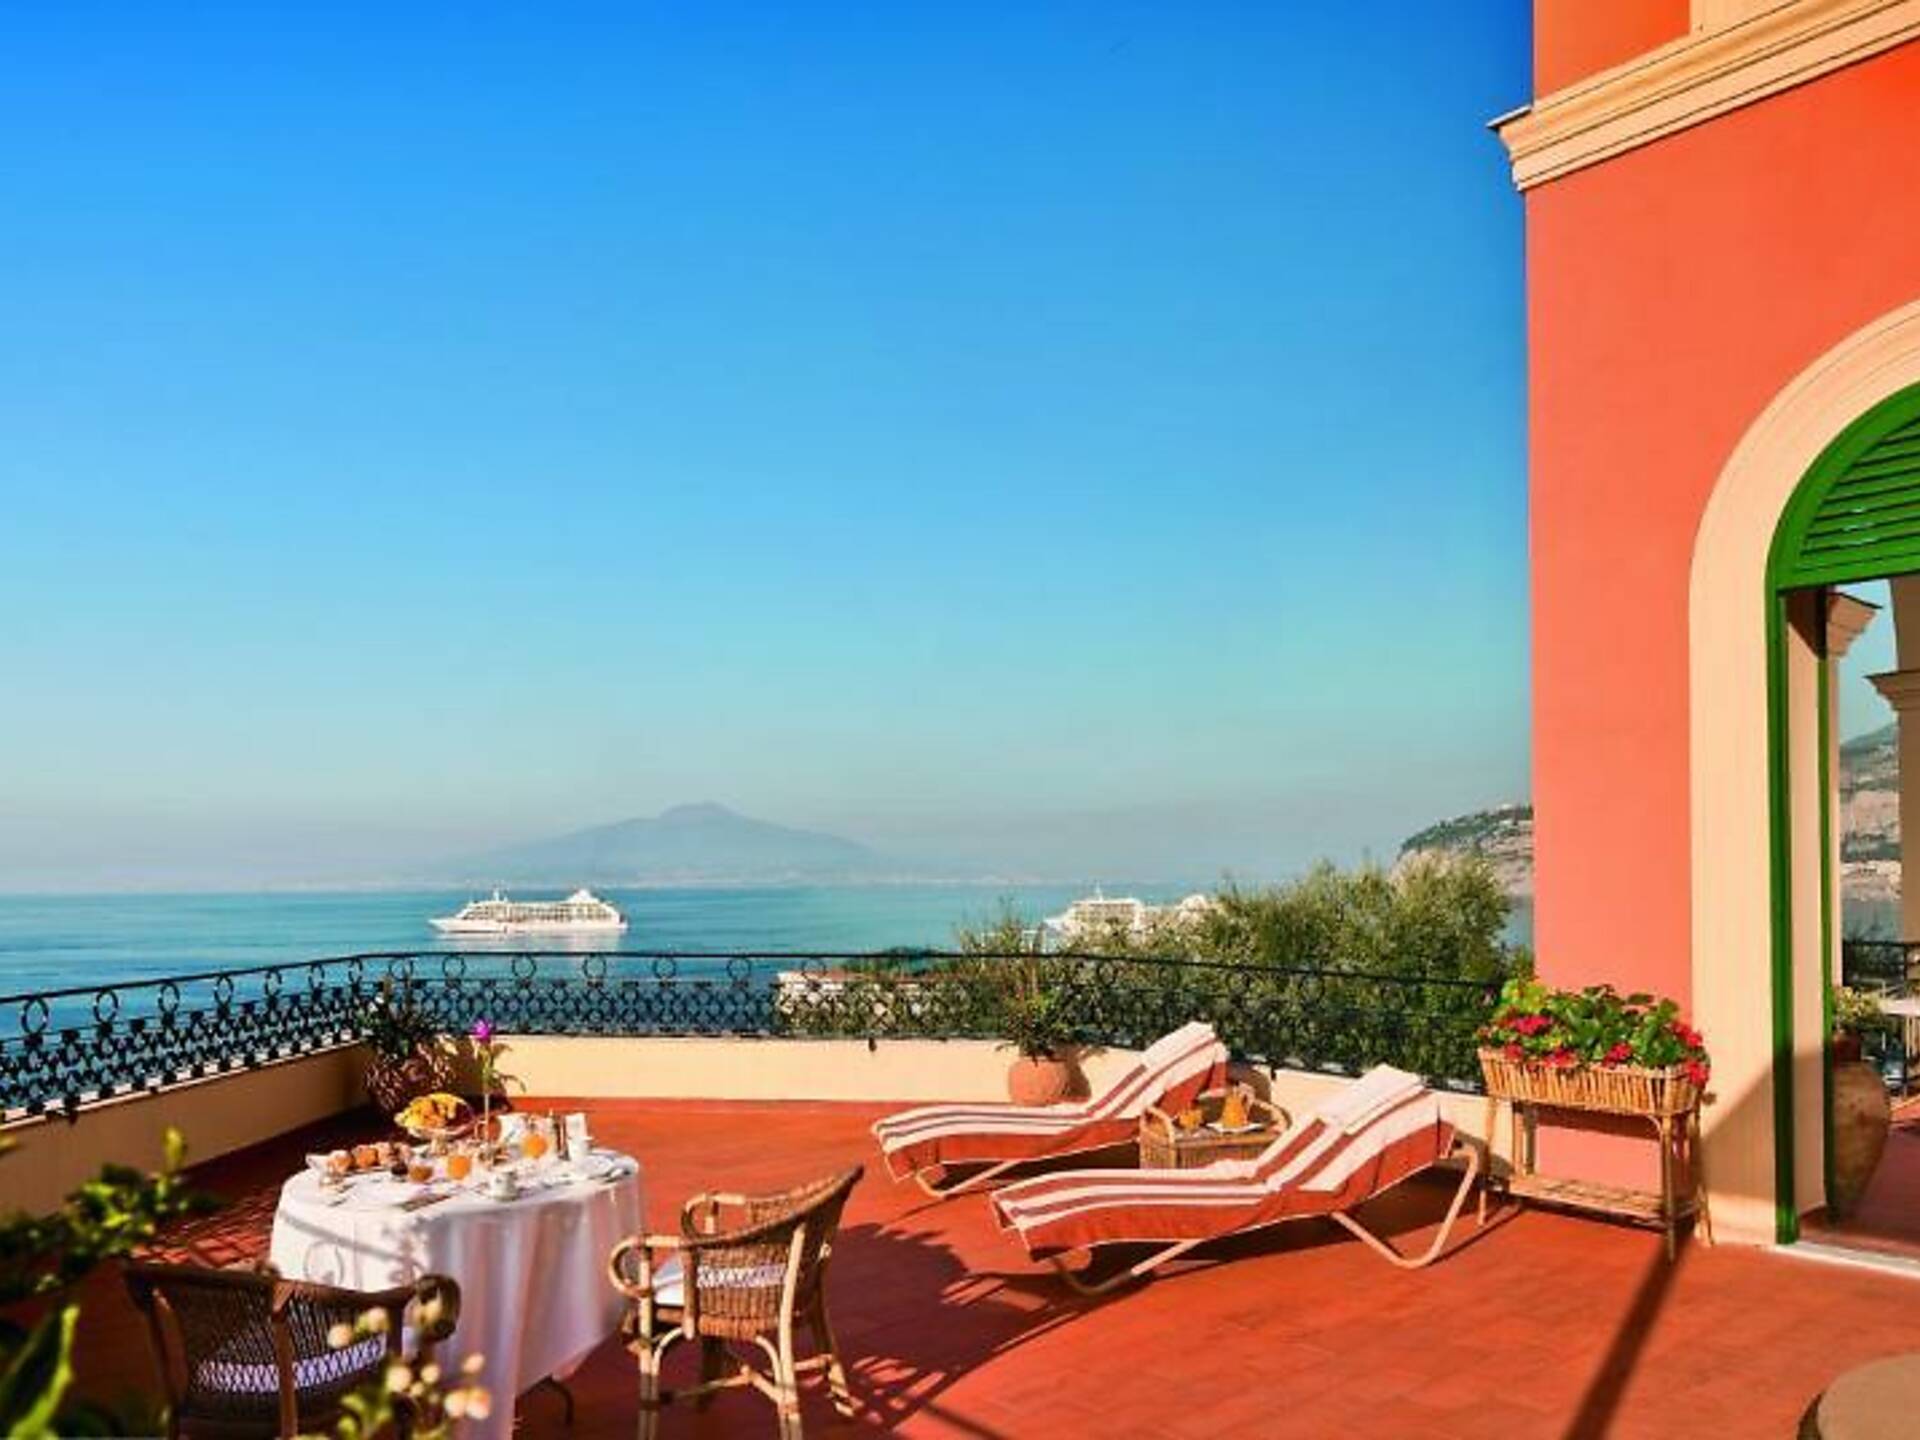 The Best Hotels in Sorrento | Best Places to Stay in Sorrento